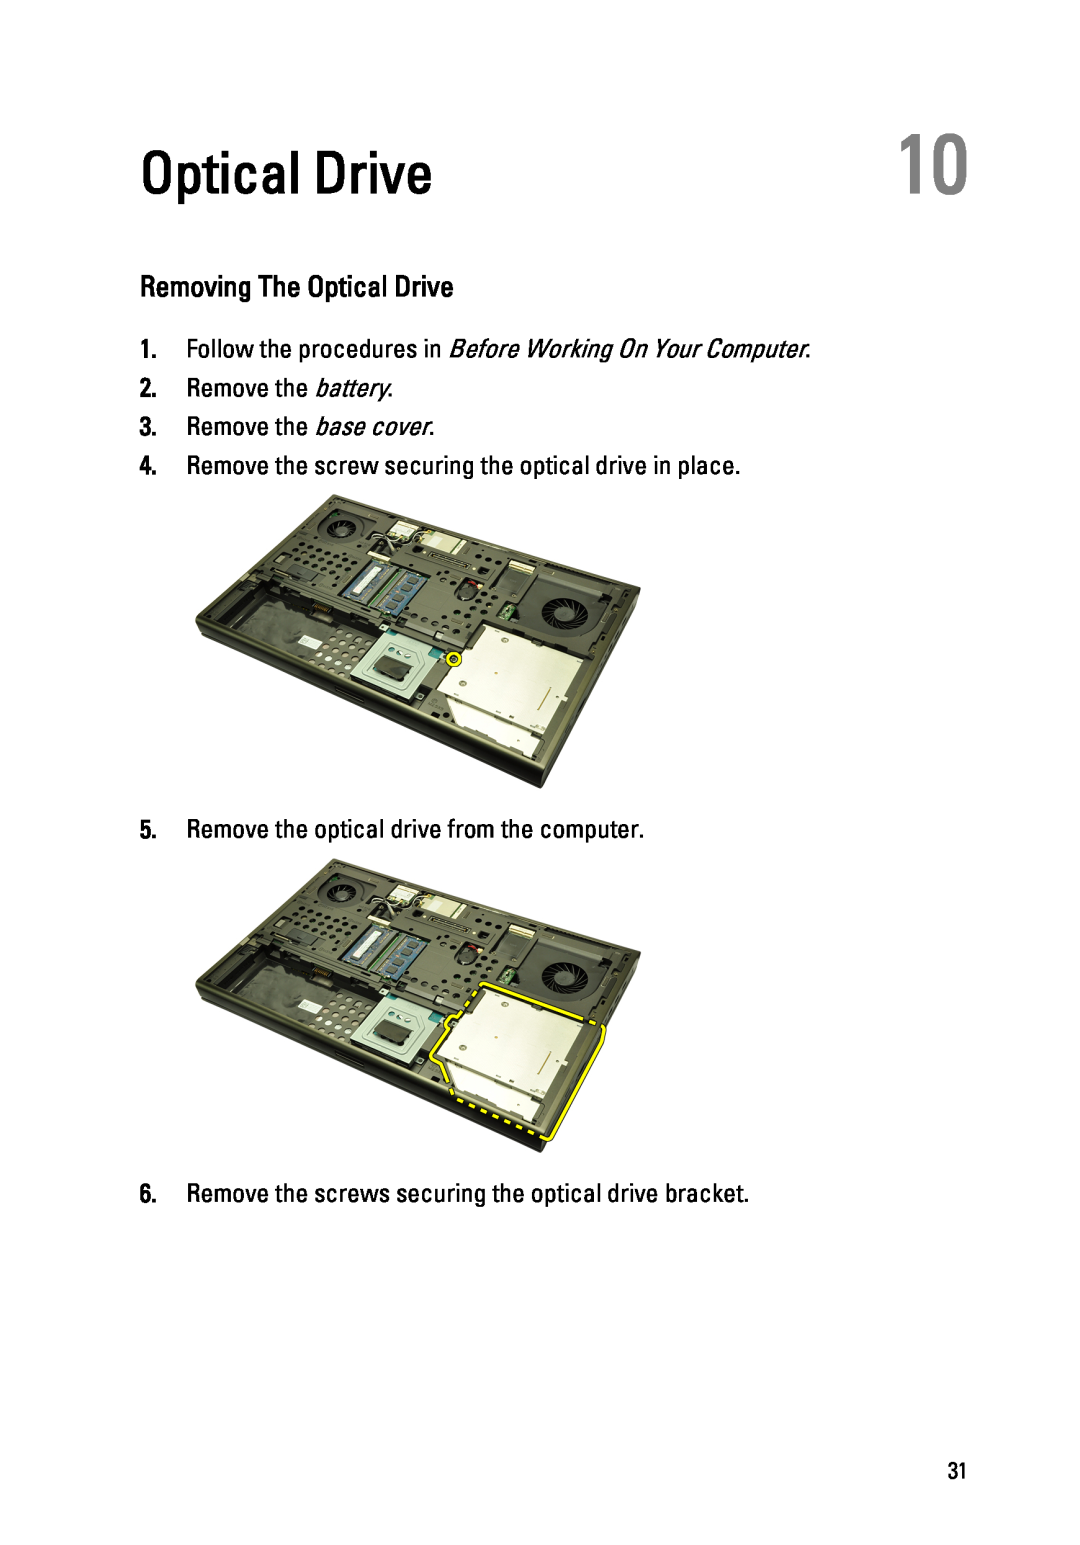 Dell M4600 owner manual Removing The Optical Drive, Remove the battery 3. Remove the base cover 